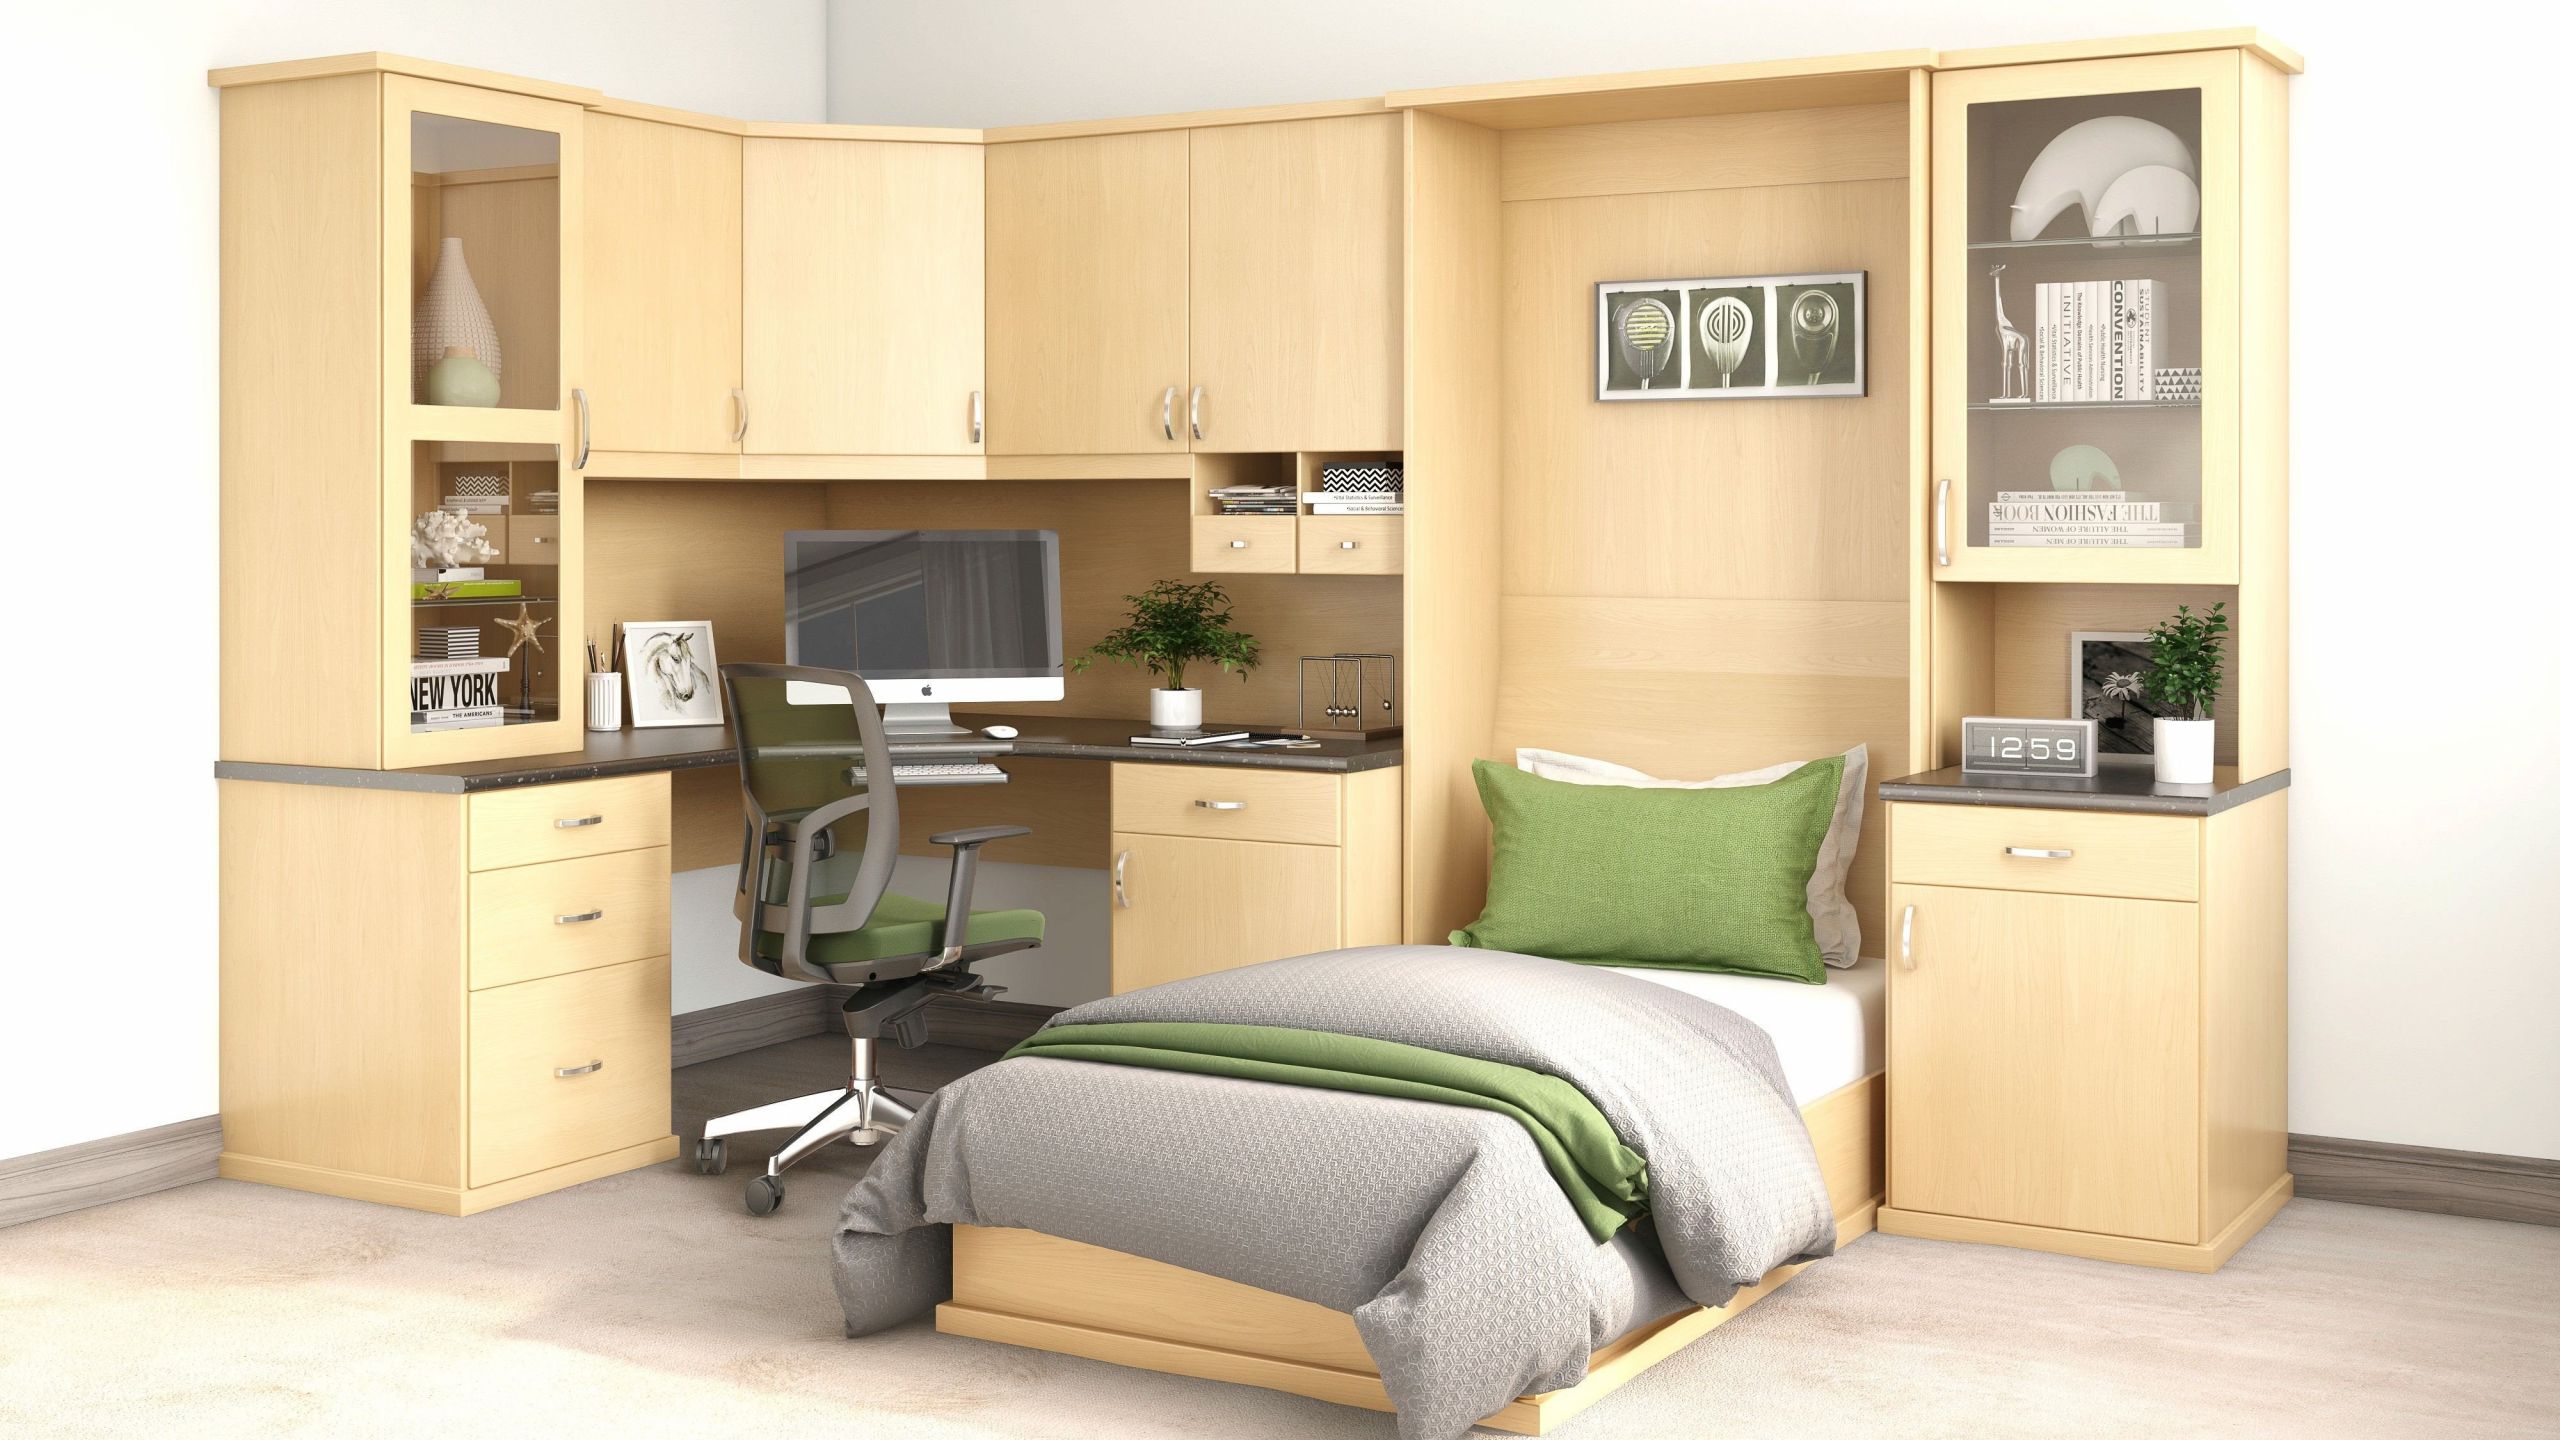 Bedroom Wall Units With Drawers
 20 Luxury Bedroom Wall Units with Drawers